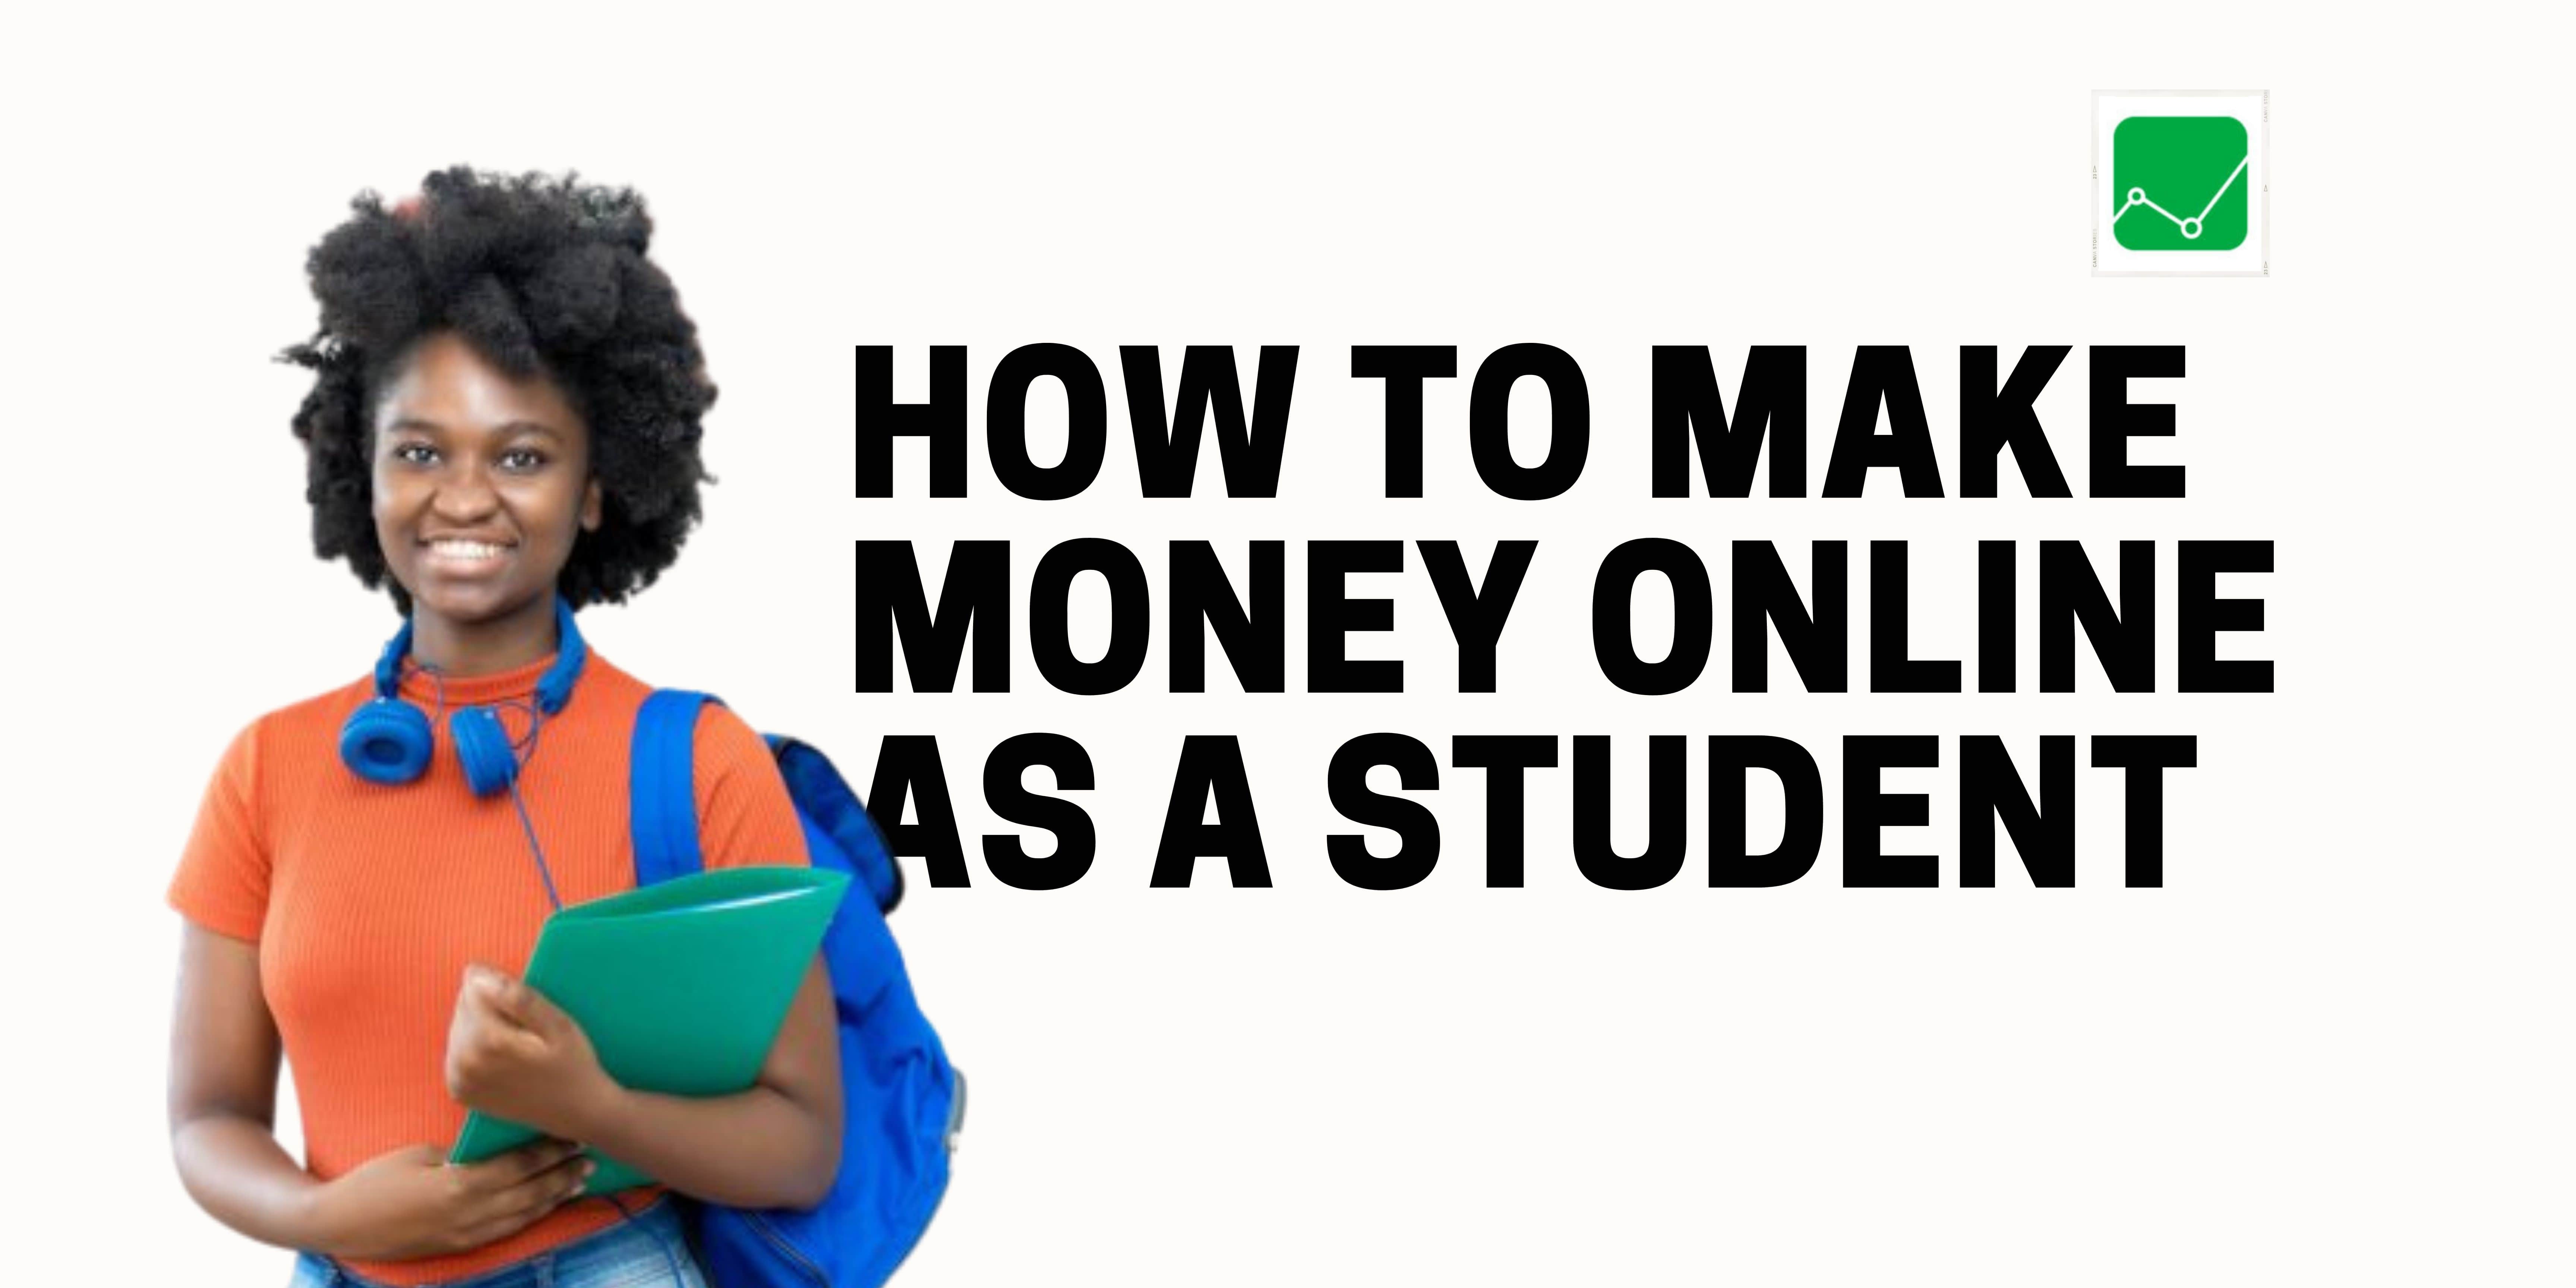 how to make money online in nigeria as a student in dubai